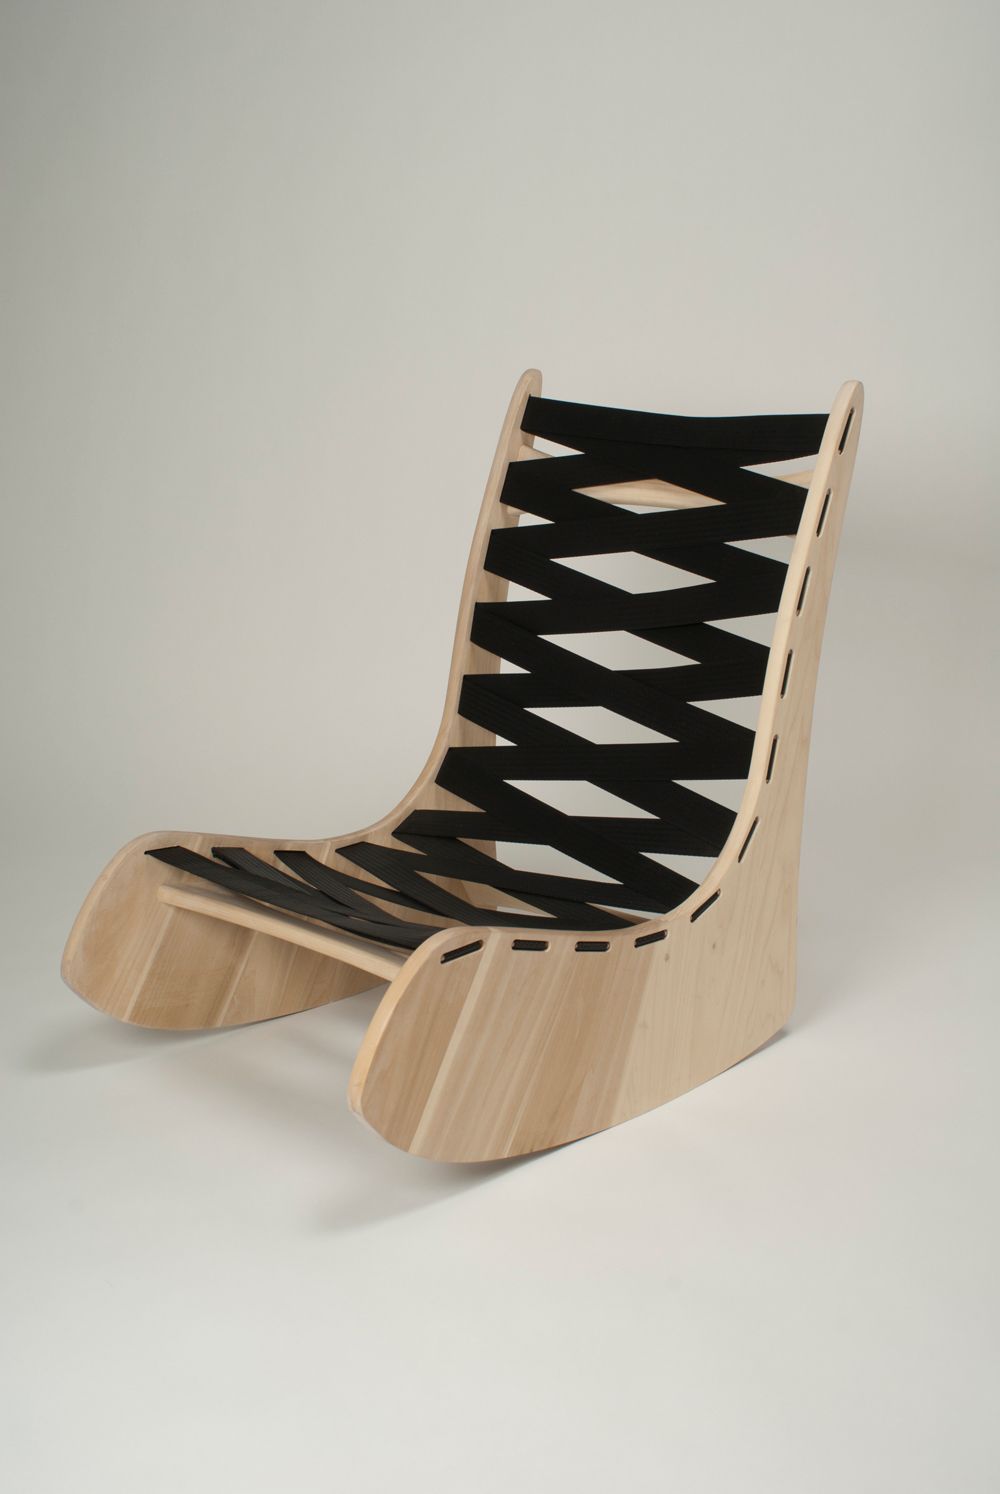 Creative Rocking Chair Inspiration for
Your Home